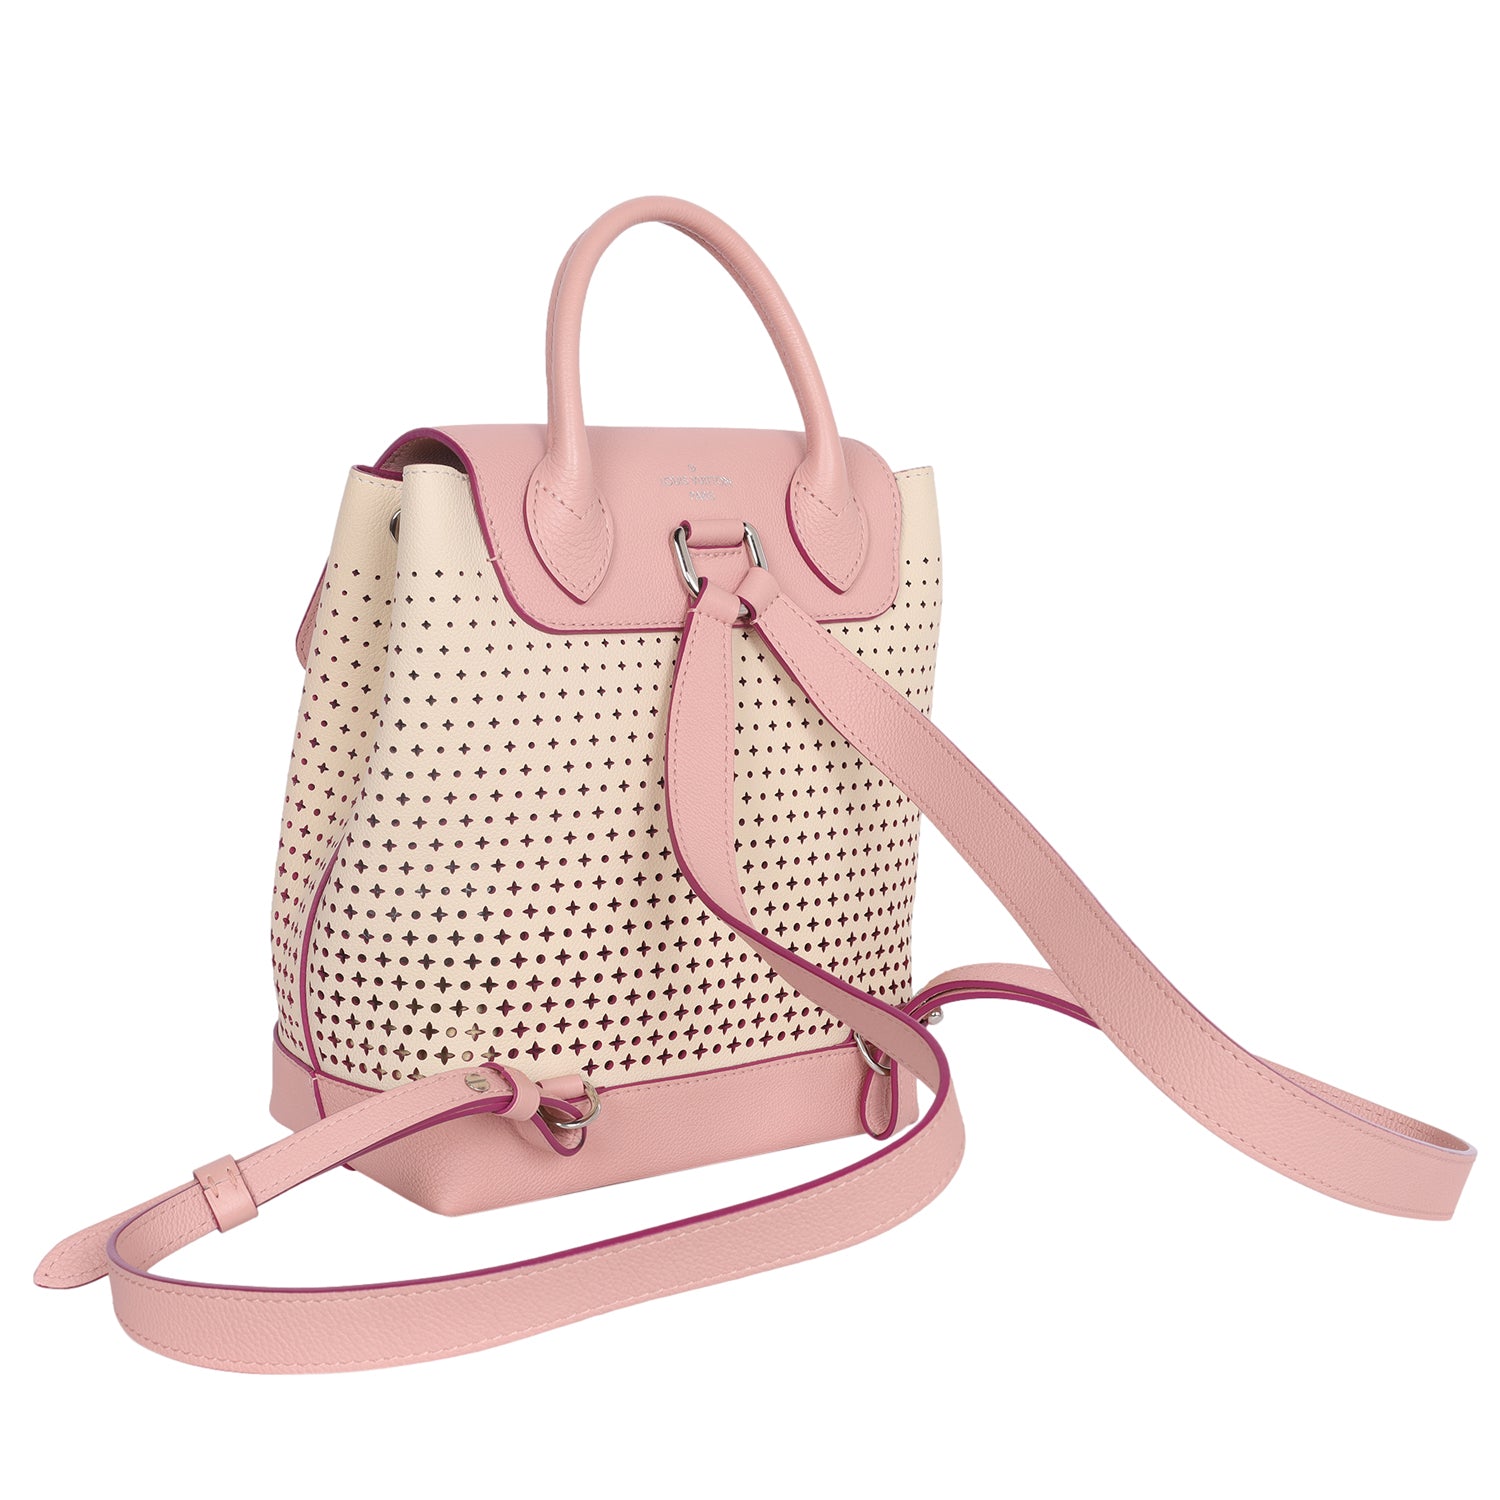 Lockme ever leather handbag Louis Vuitton Pink in Leather - 32680030